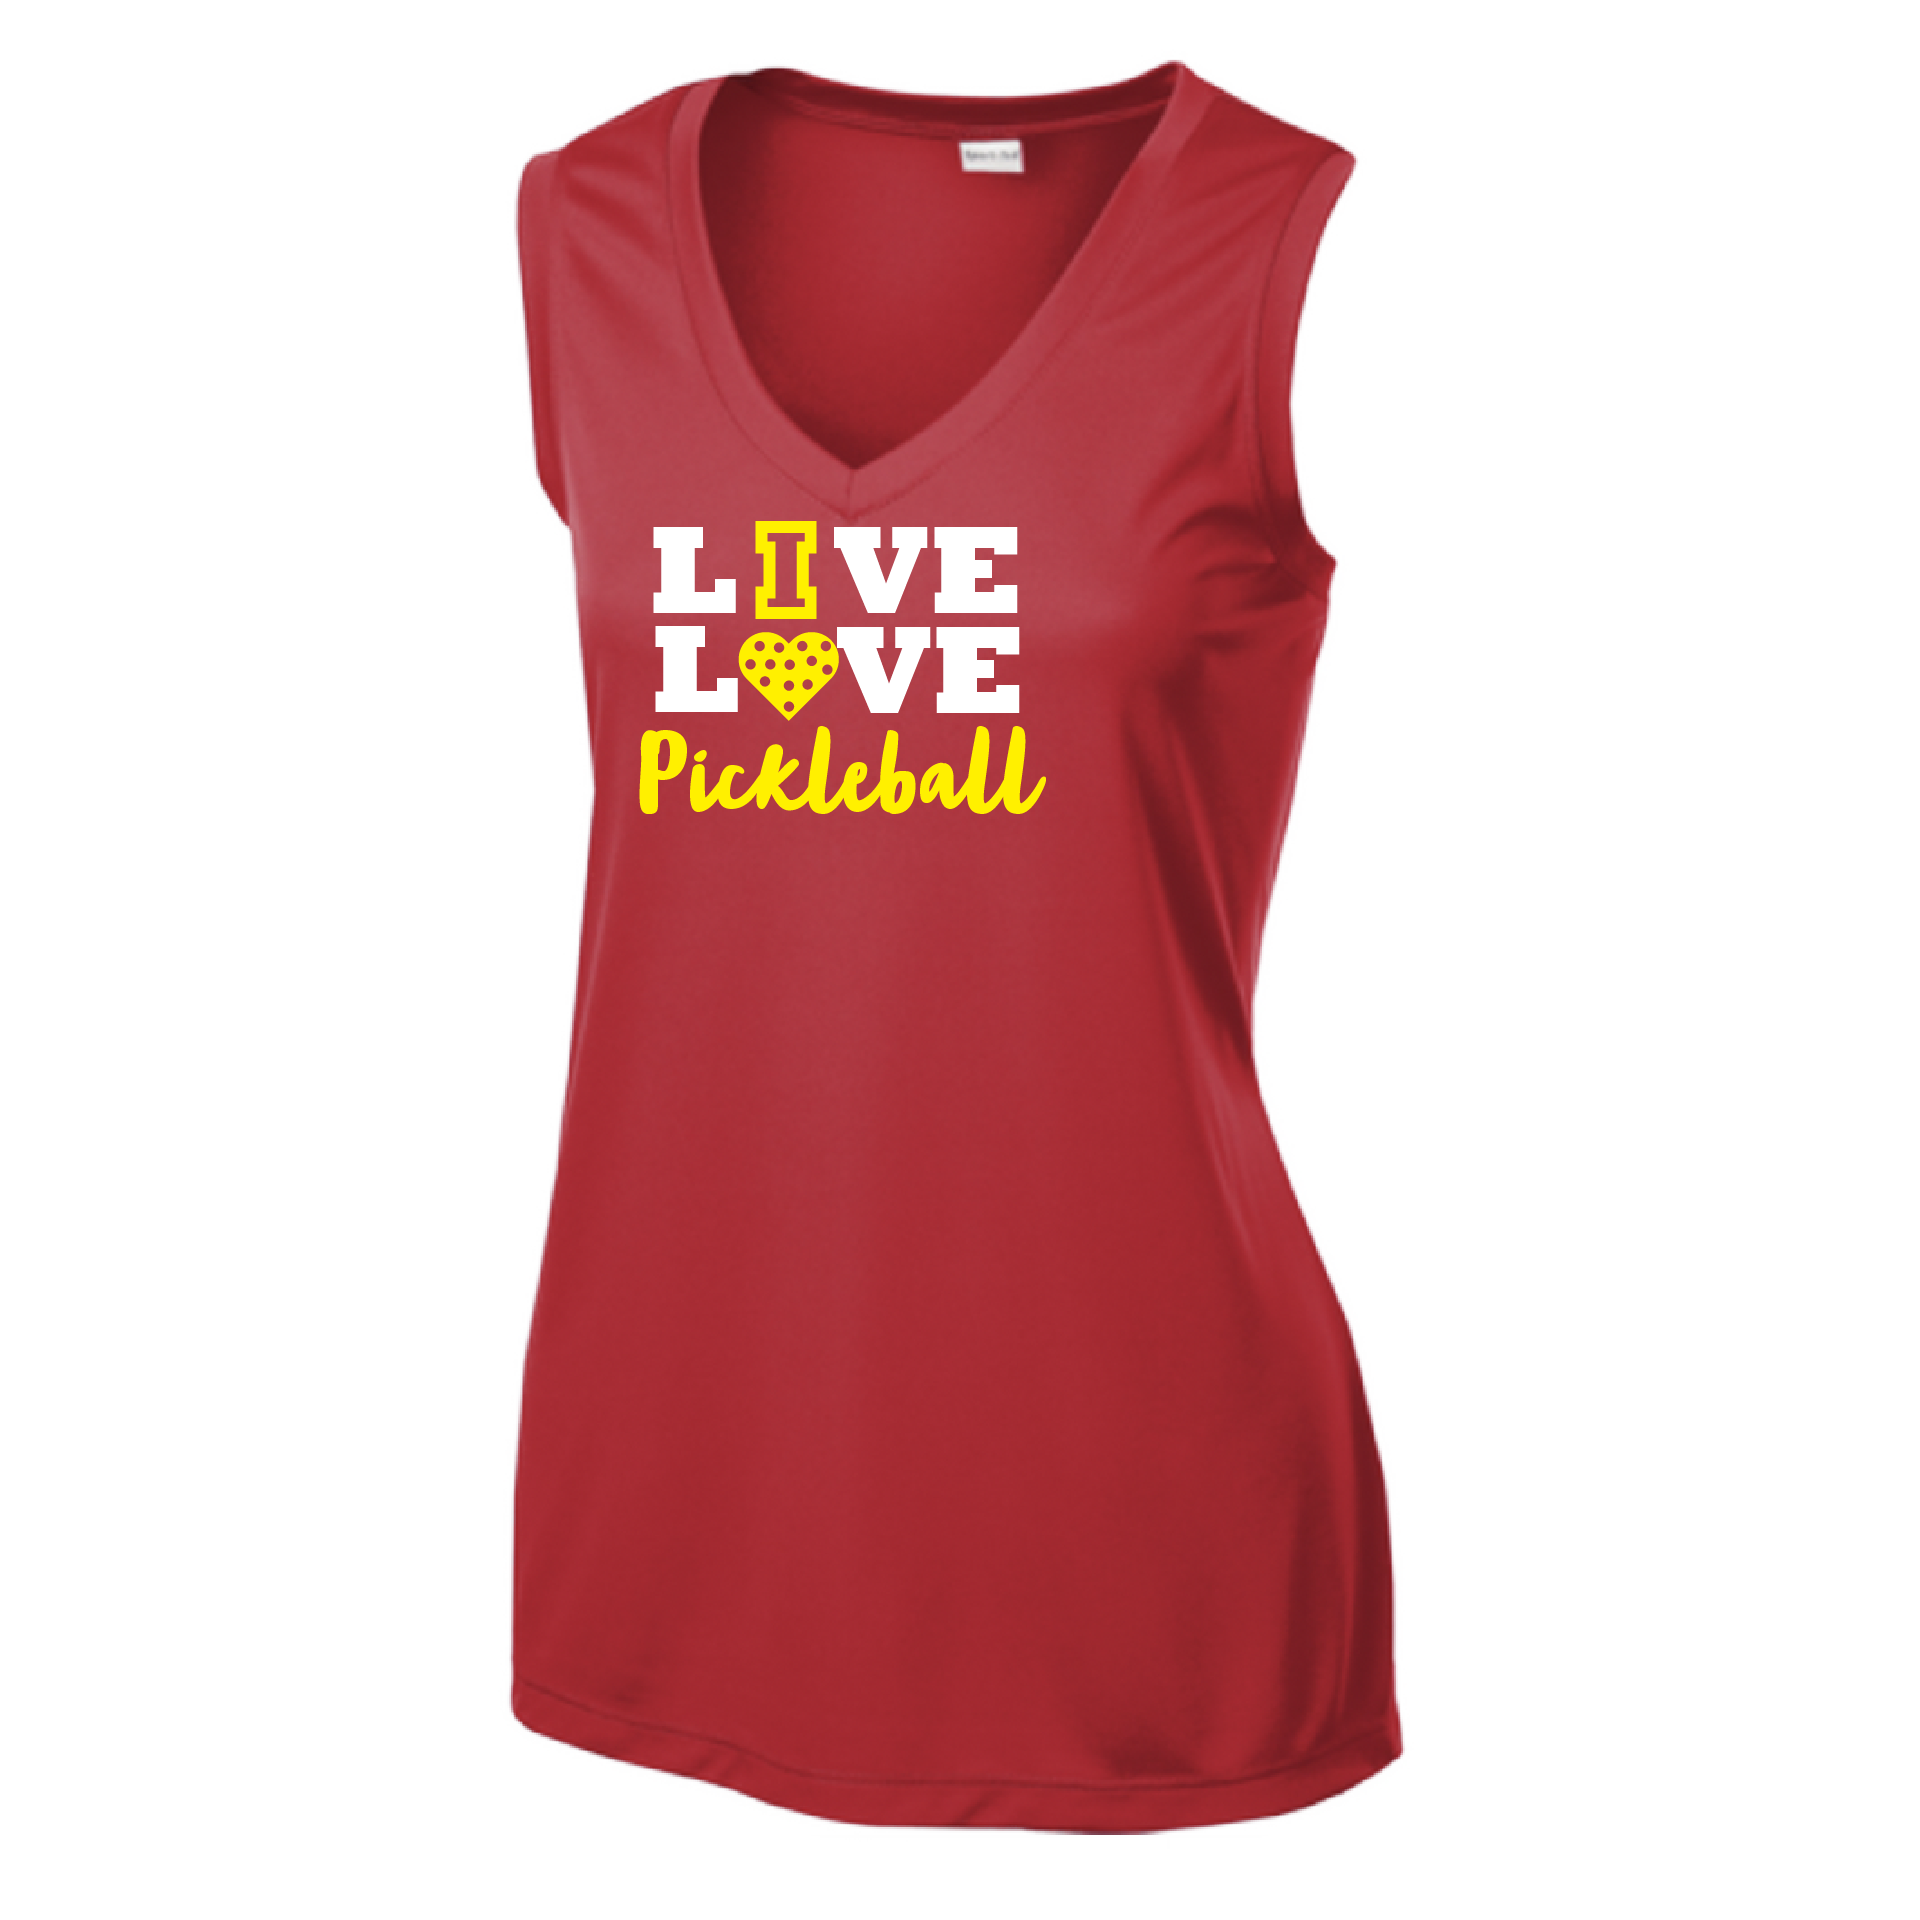 Pickleball Design: Live Love Pickleball  Women's Style: Sleeveless Tank  Turn up the volume in this Women's shirt with its perfect mix of softness and attitude. Material is ultra-comfortable with moisture wicking properties and tri-blend softness. PosiCharge technology locks in color. Highly breathable and lightweight.